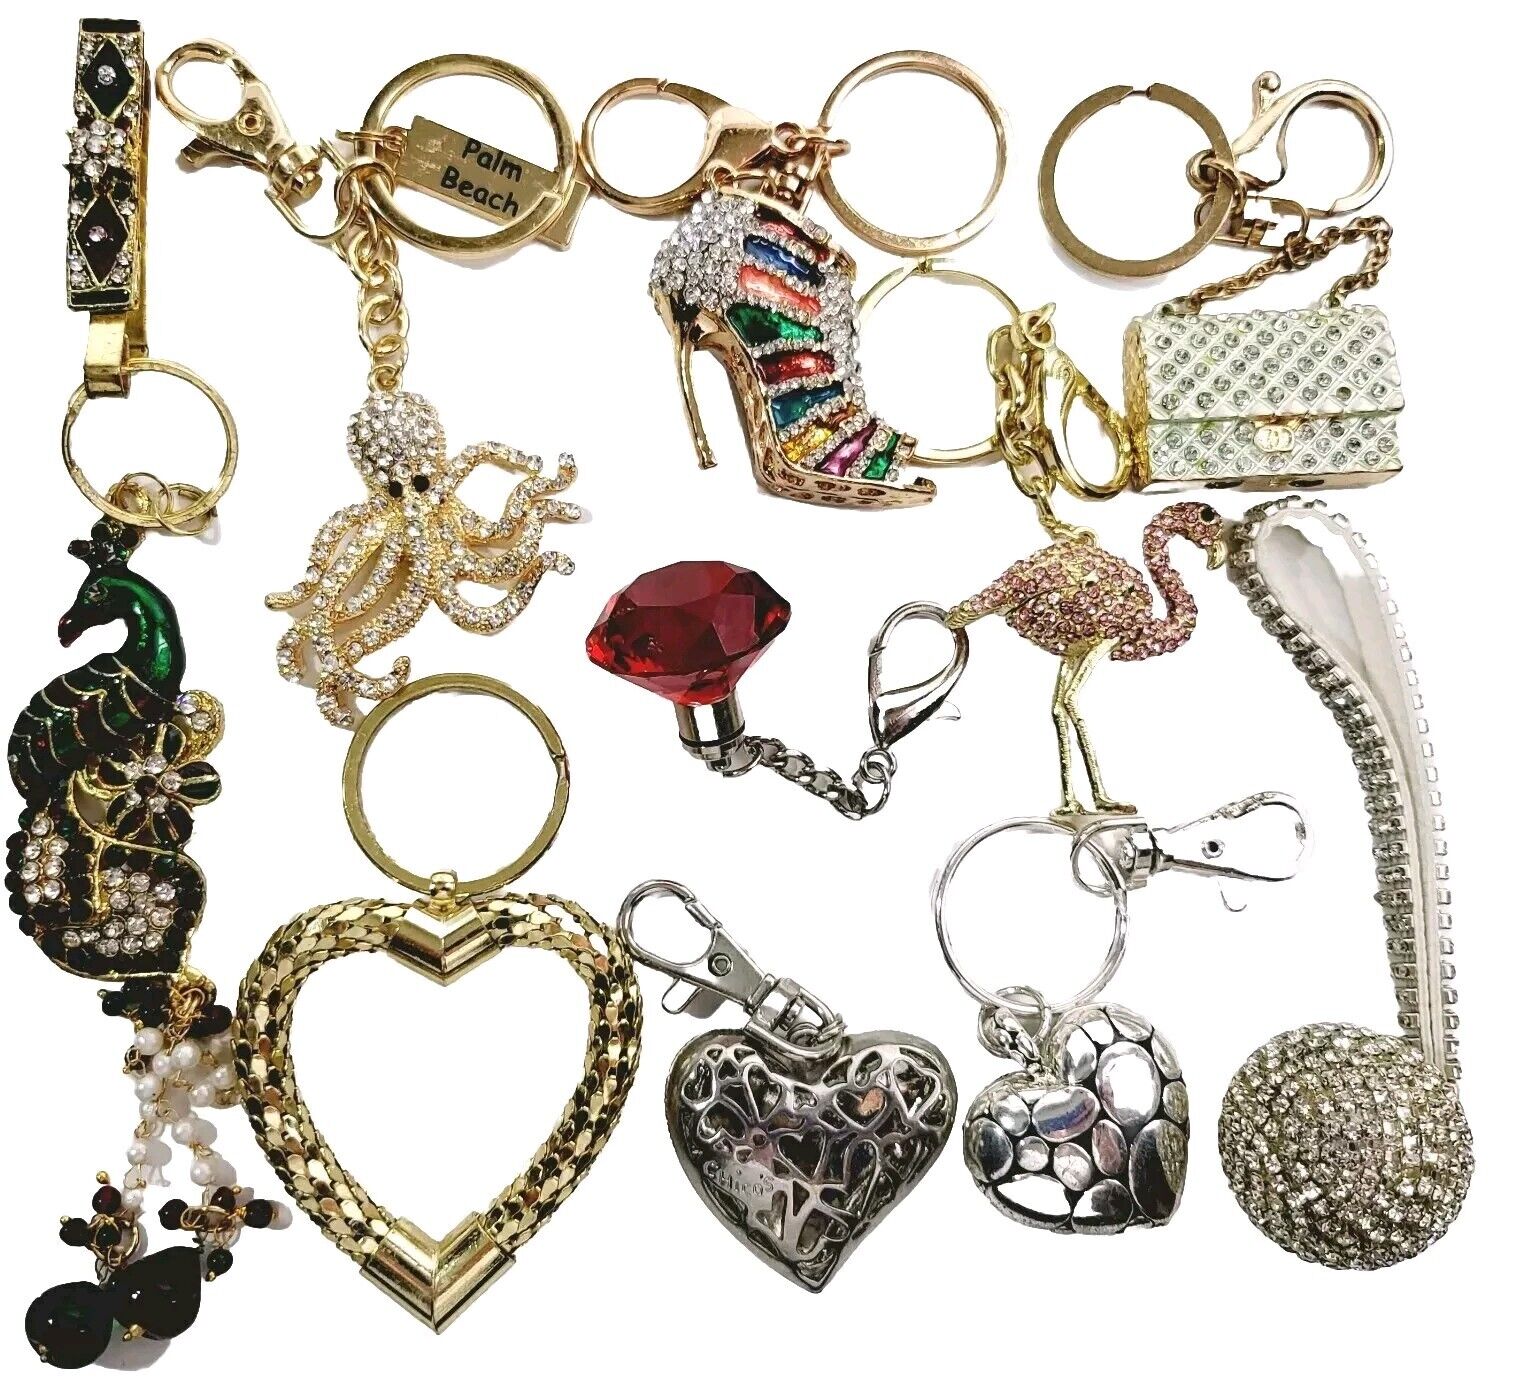 Keychain Lot Bling Style Vintage & Modern Novelty Fashion Key Chains 10pcs Total